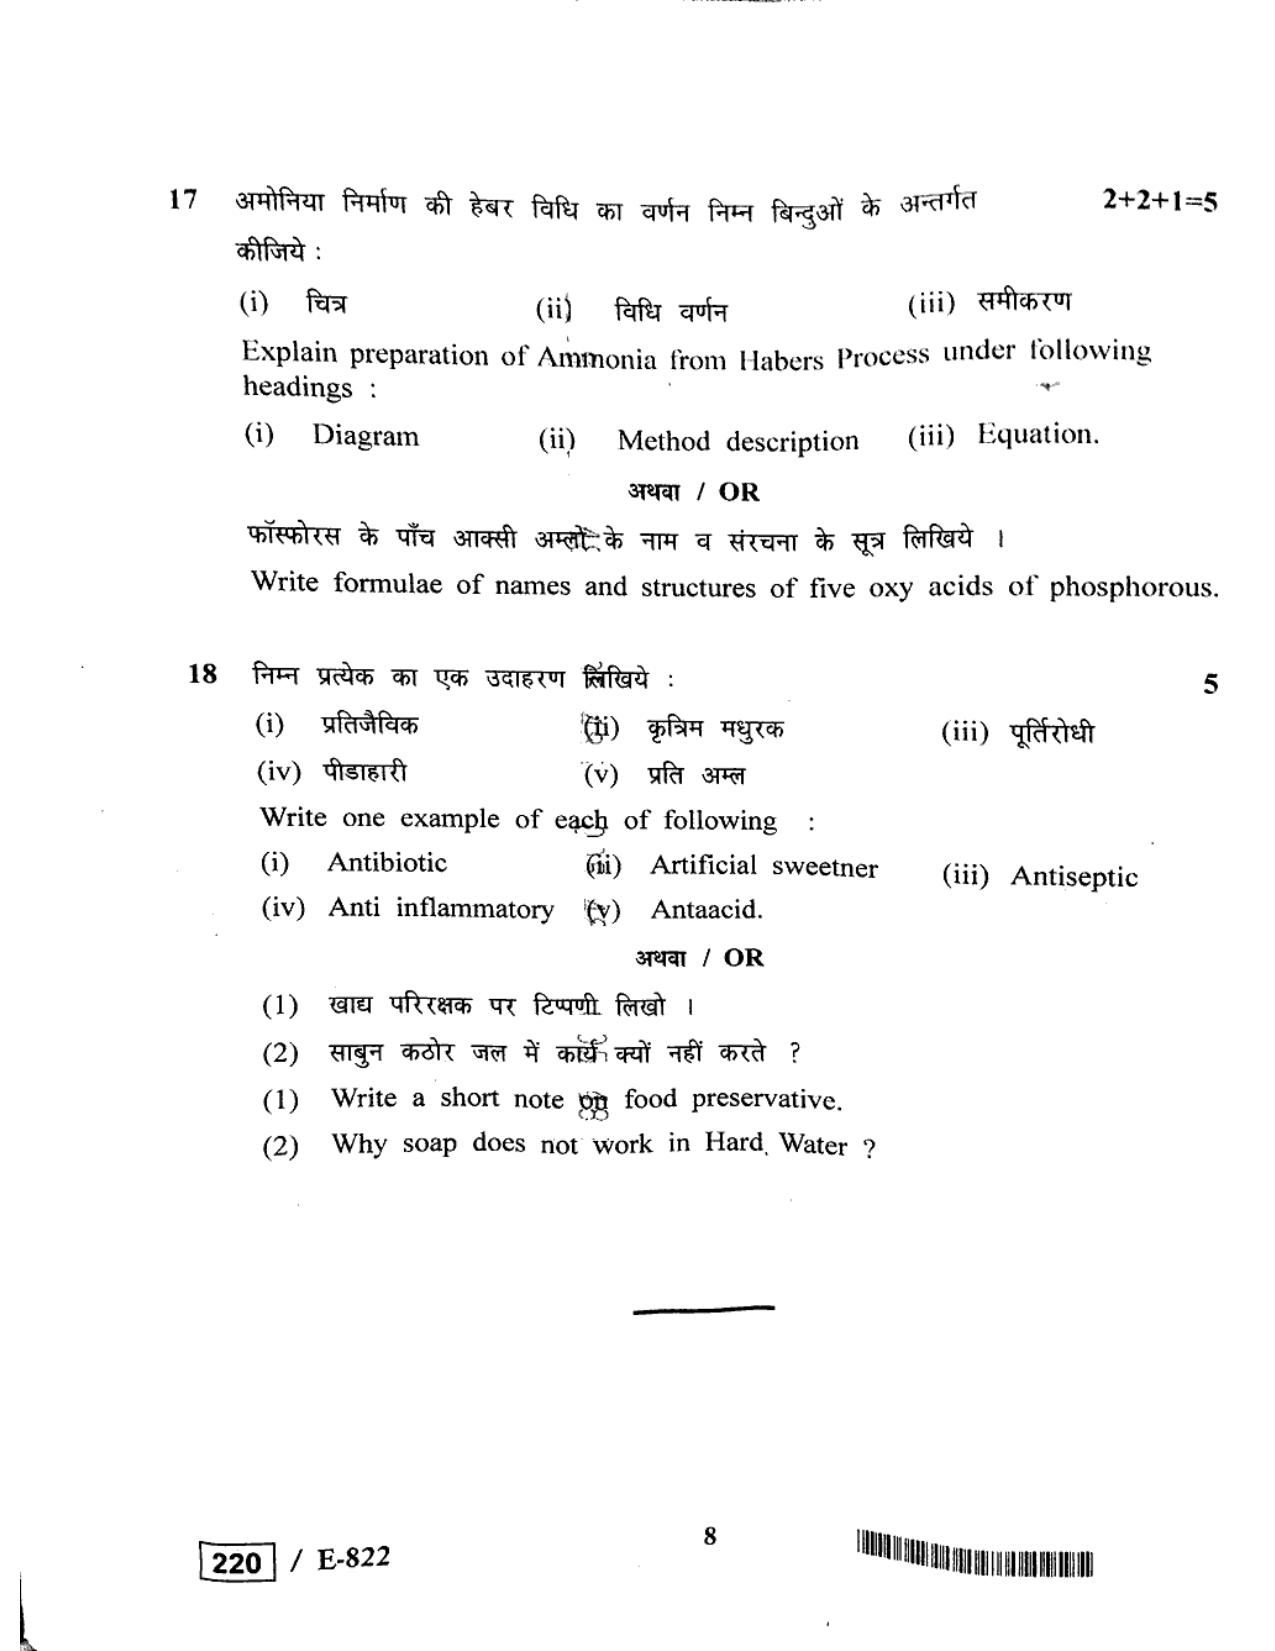 MP Board Class 12 Chemistry 2020 Question Paper - Page 8